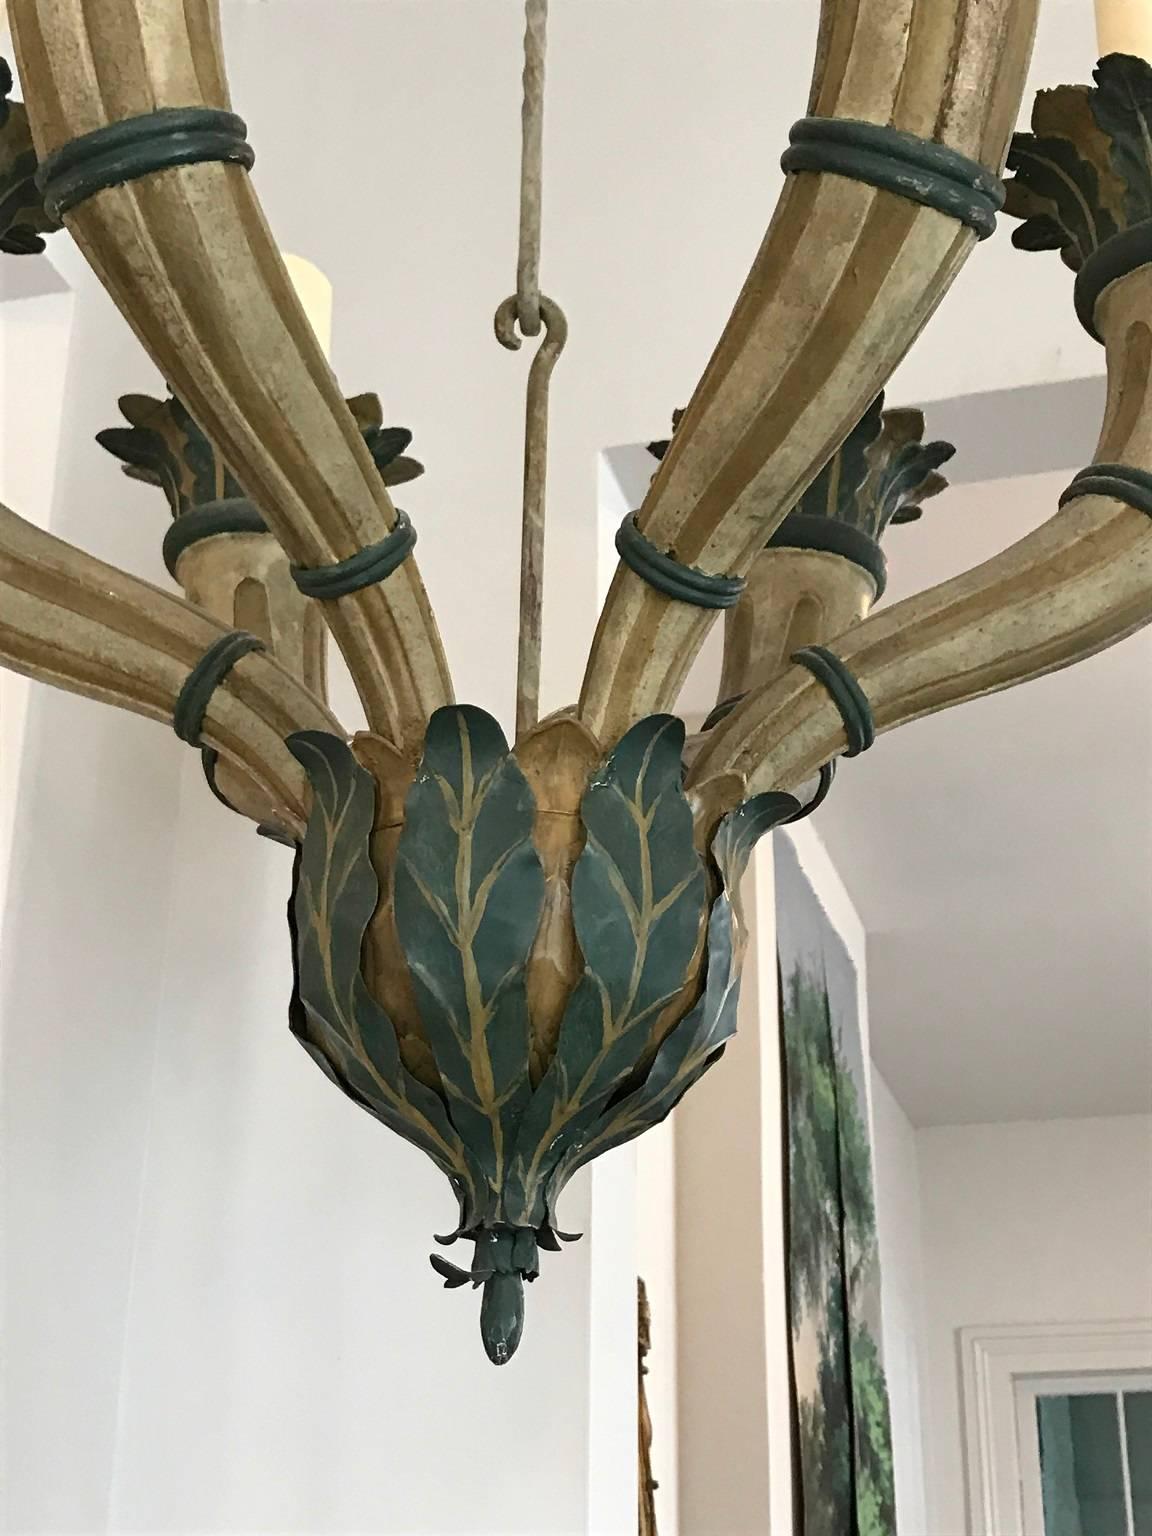 Tole chandelier of generous proportion, six horn-shaped arms supporting pillar "candles" foliate decoration throughout.